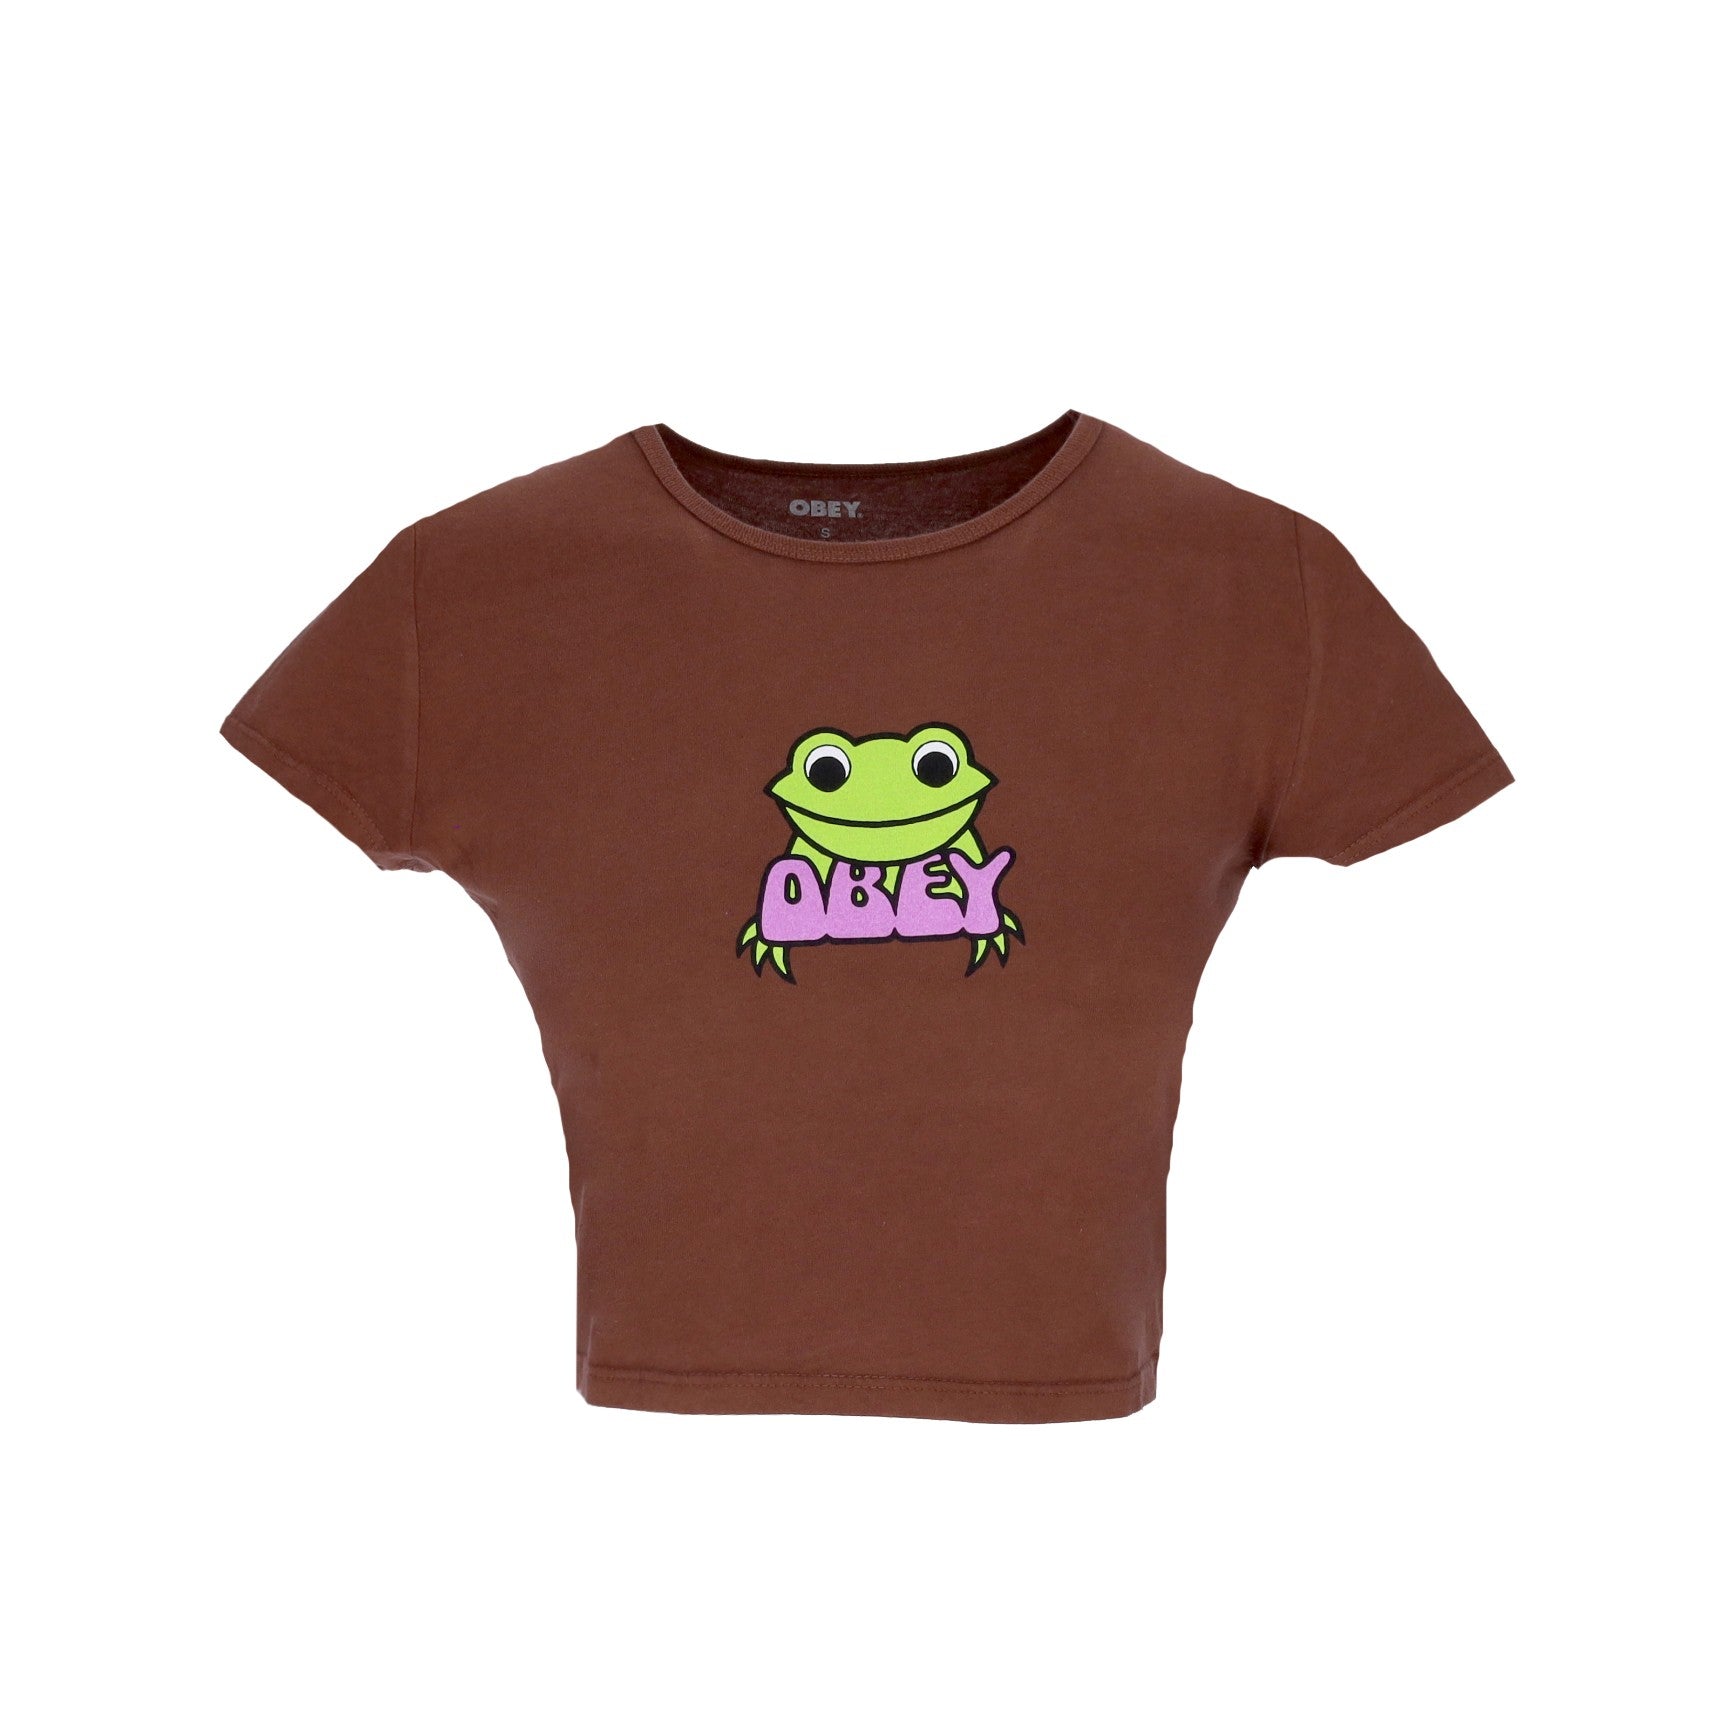 Cropped Women's T-Shirt Ribbit Cropped Chloe Fitted Tee Sepia